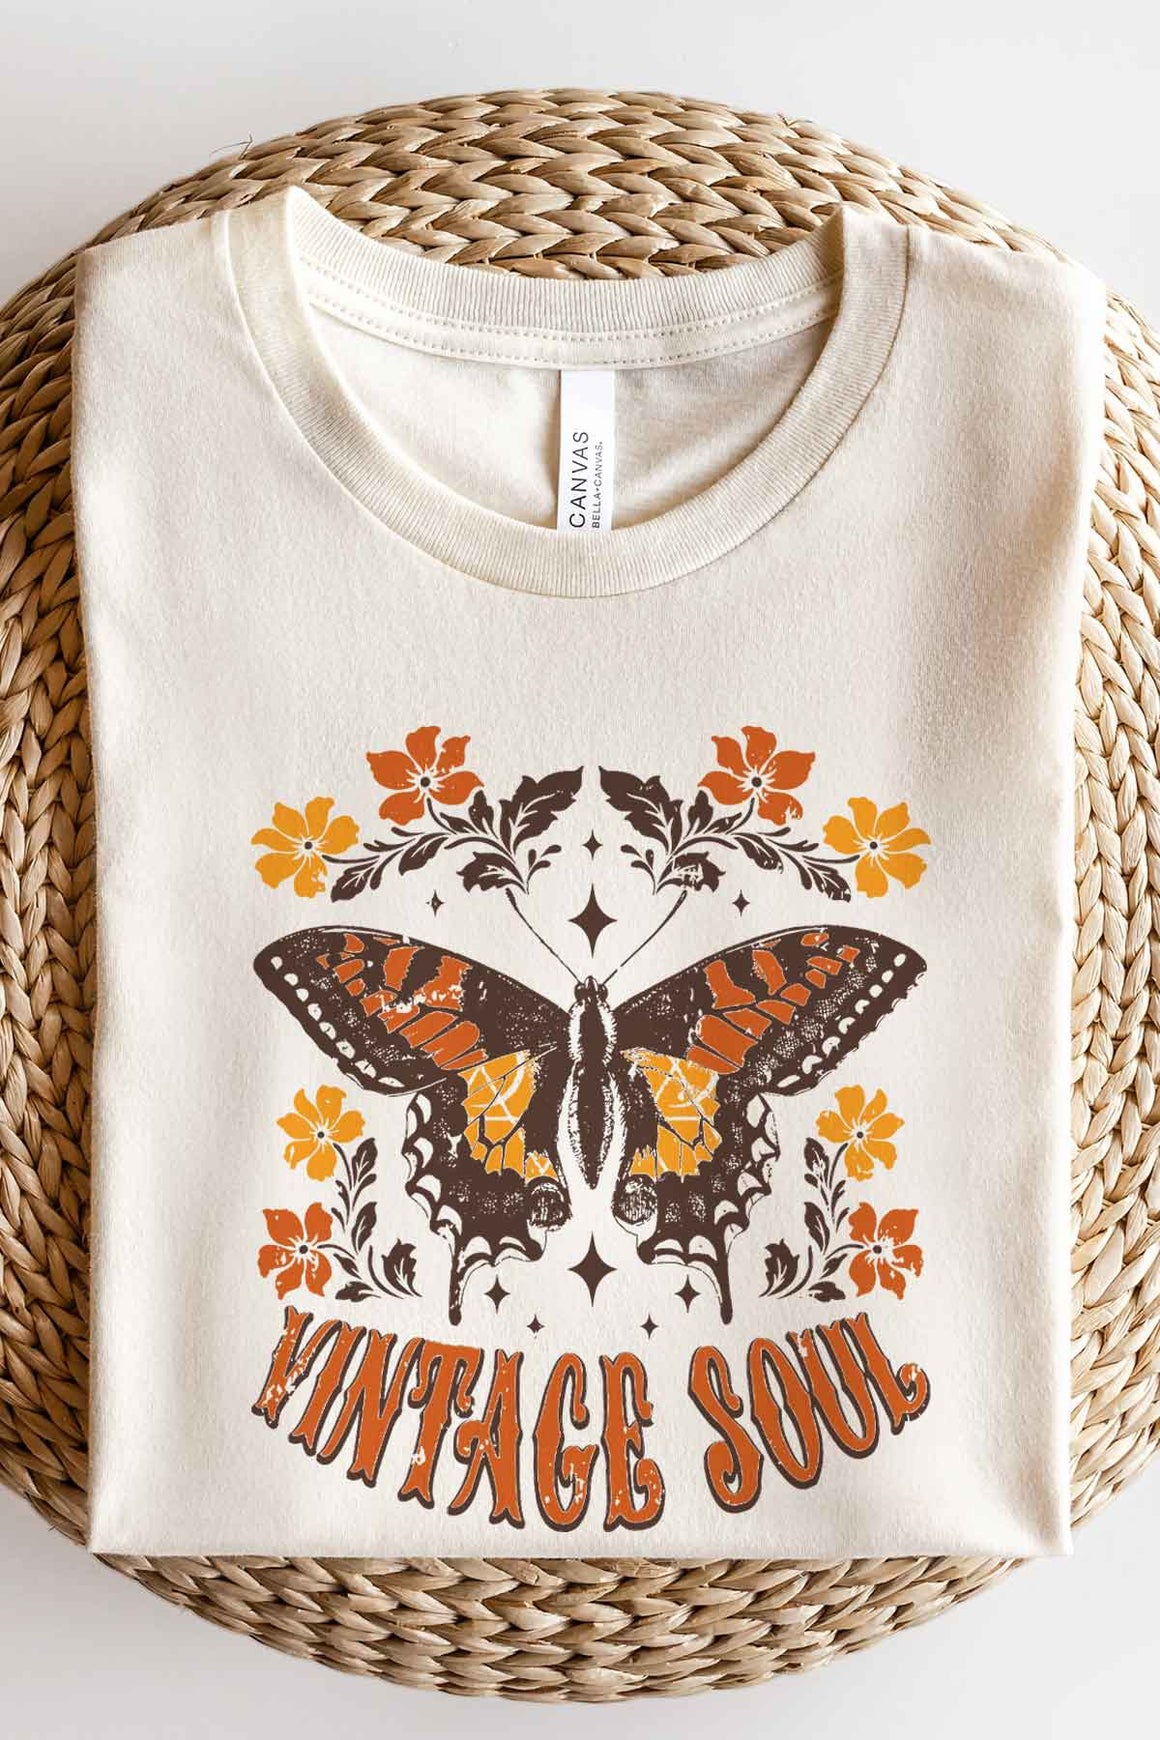 Vintage Soul Butterfly Graphic Tee